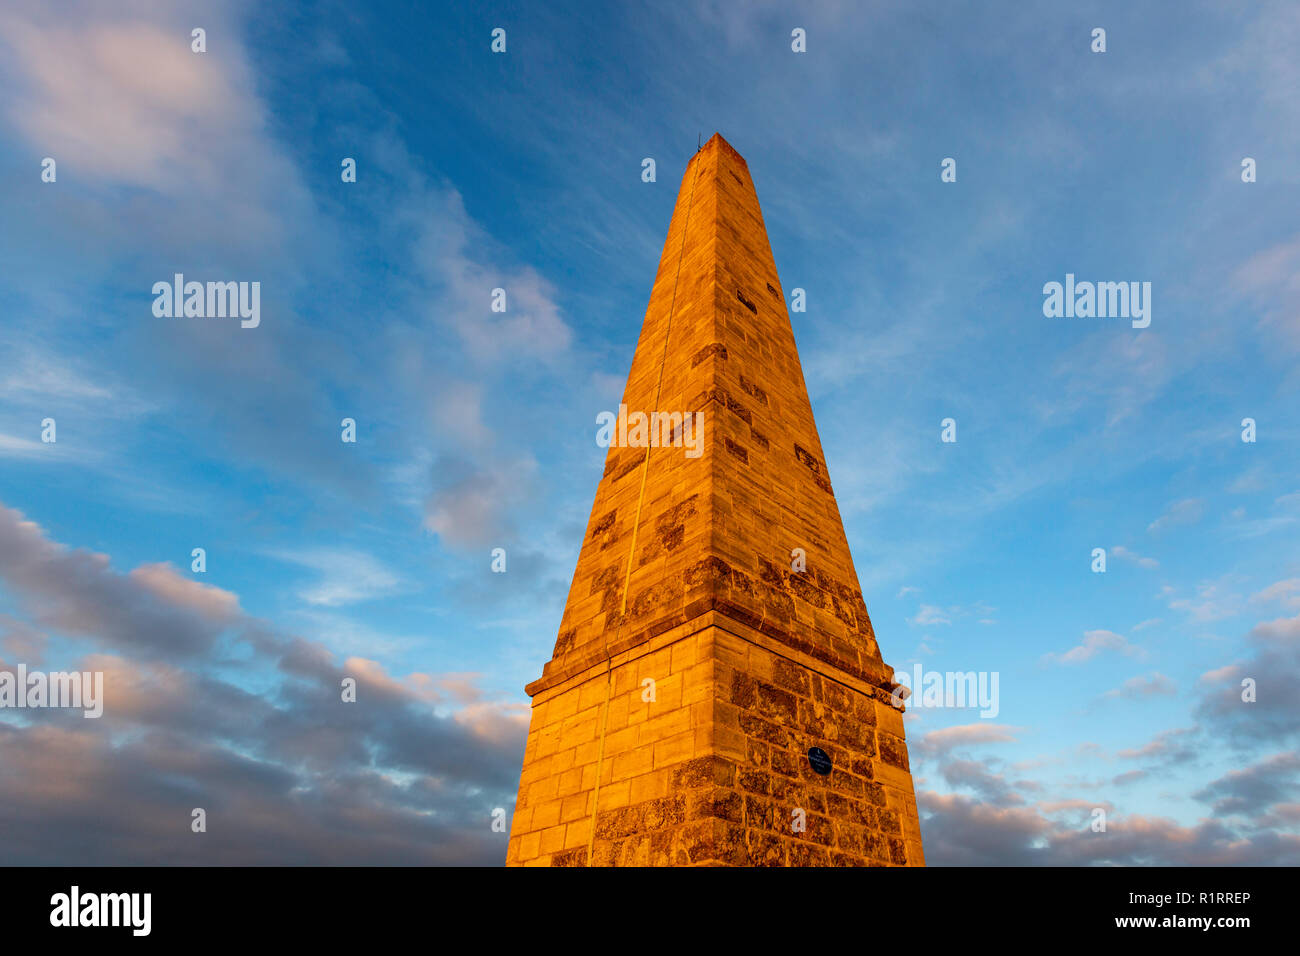 The Bilsington Obelisk, also known as The Cosway Monument. 16m tall and stands in a field in Bilsington between Ashford and Romney Marsh. Stock Photo